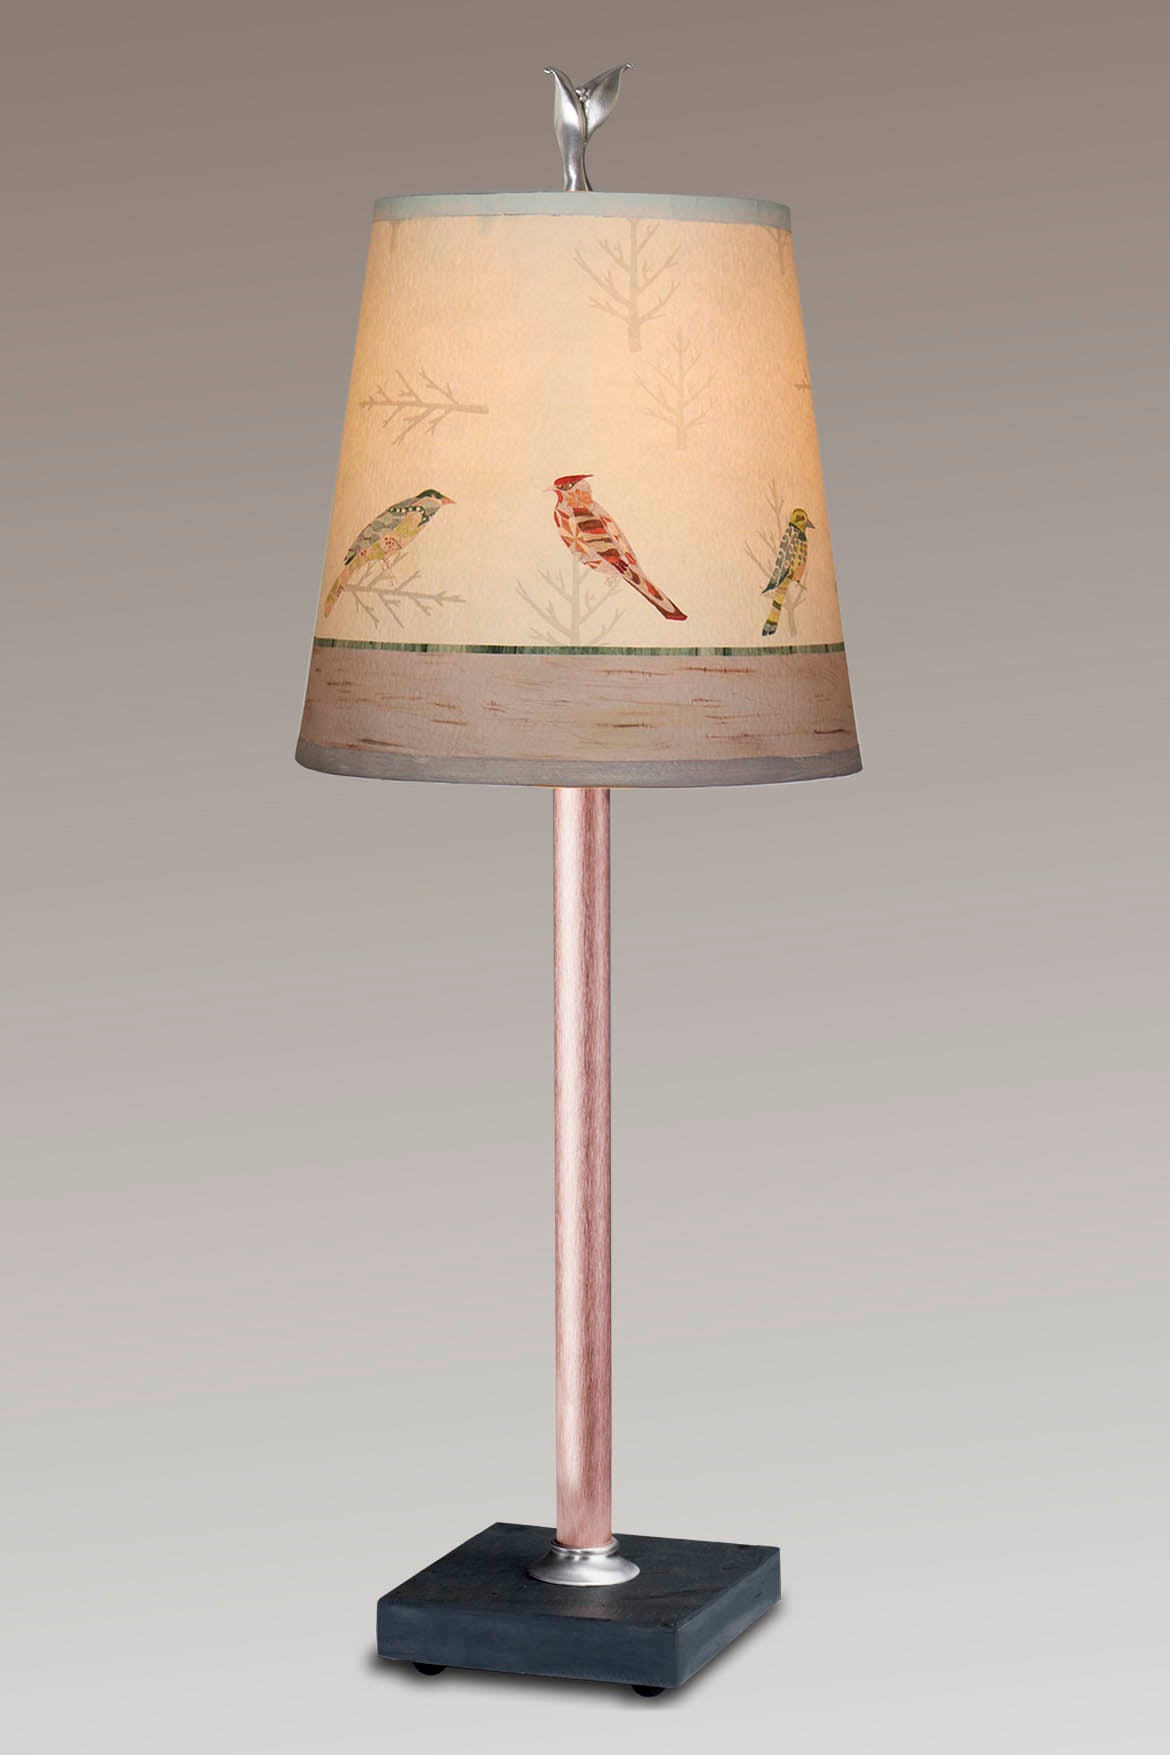 Copper Table Lamp with Small Drum Shade in Bird Friends